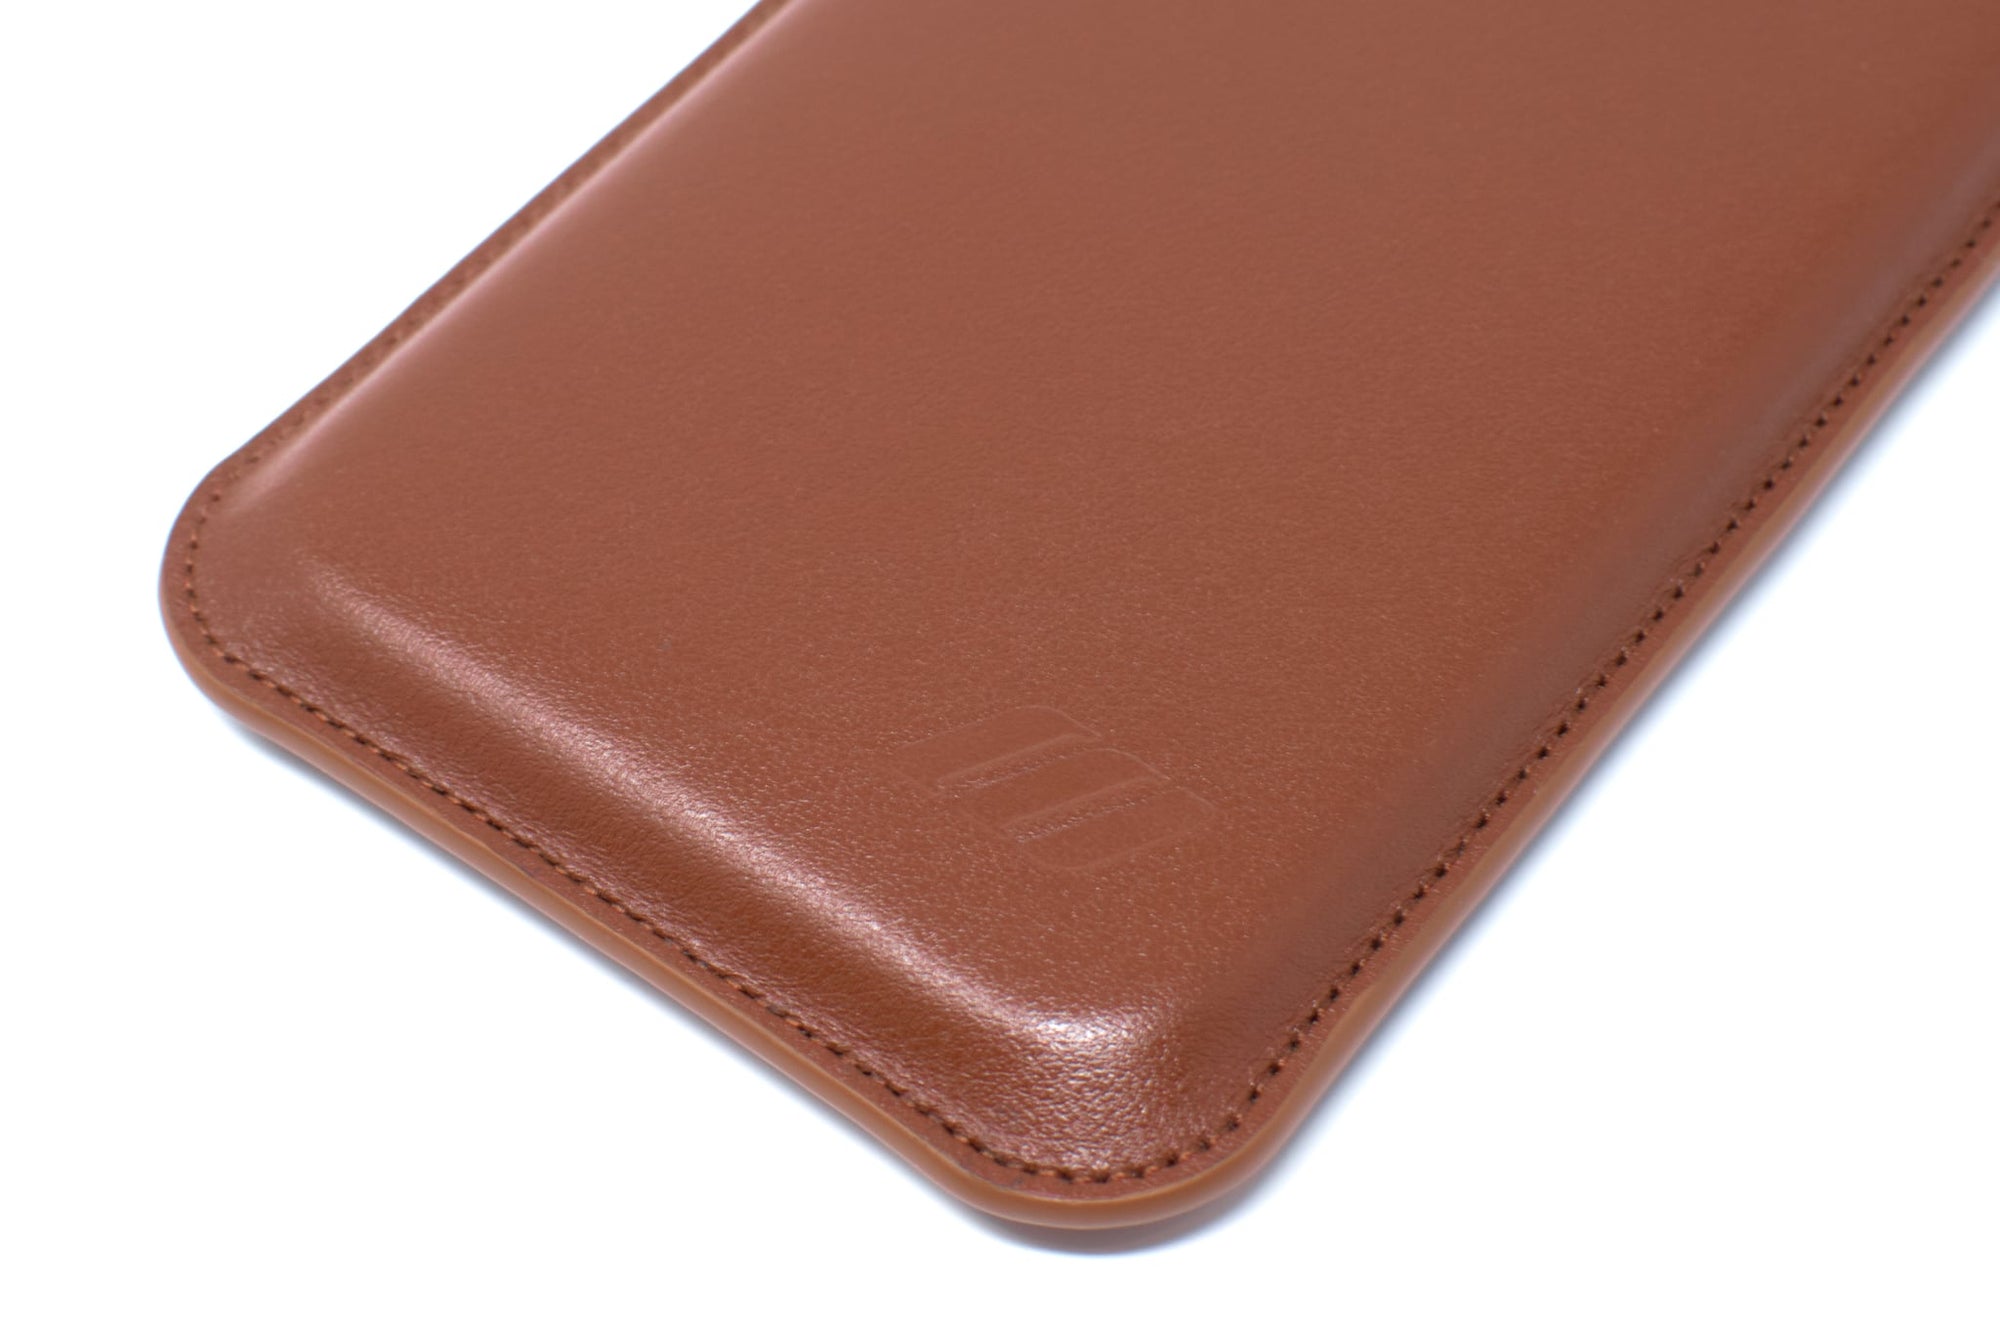 Apple iPhone 13 Pro Leather Sleeve Case - Skinny Fit - Acorn Brown